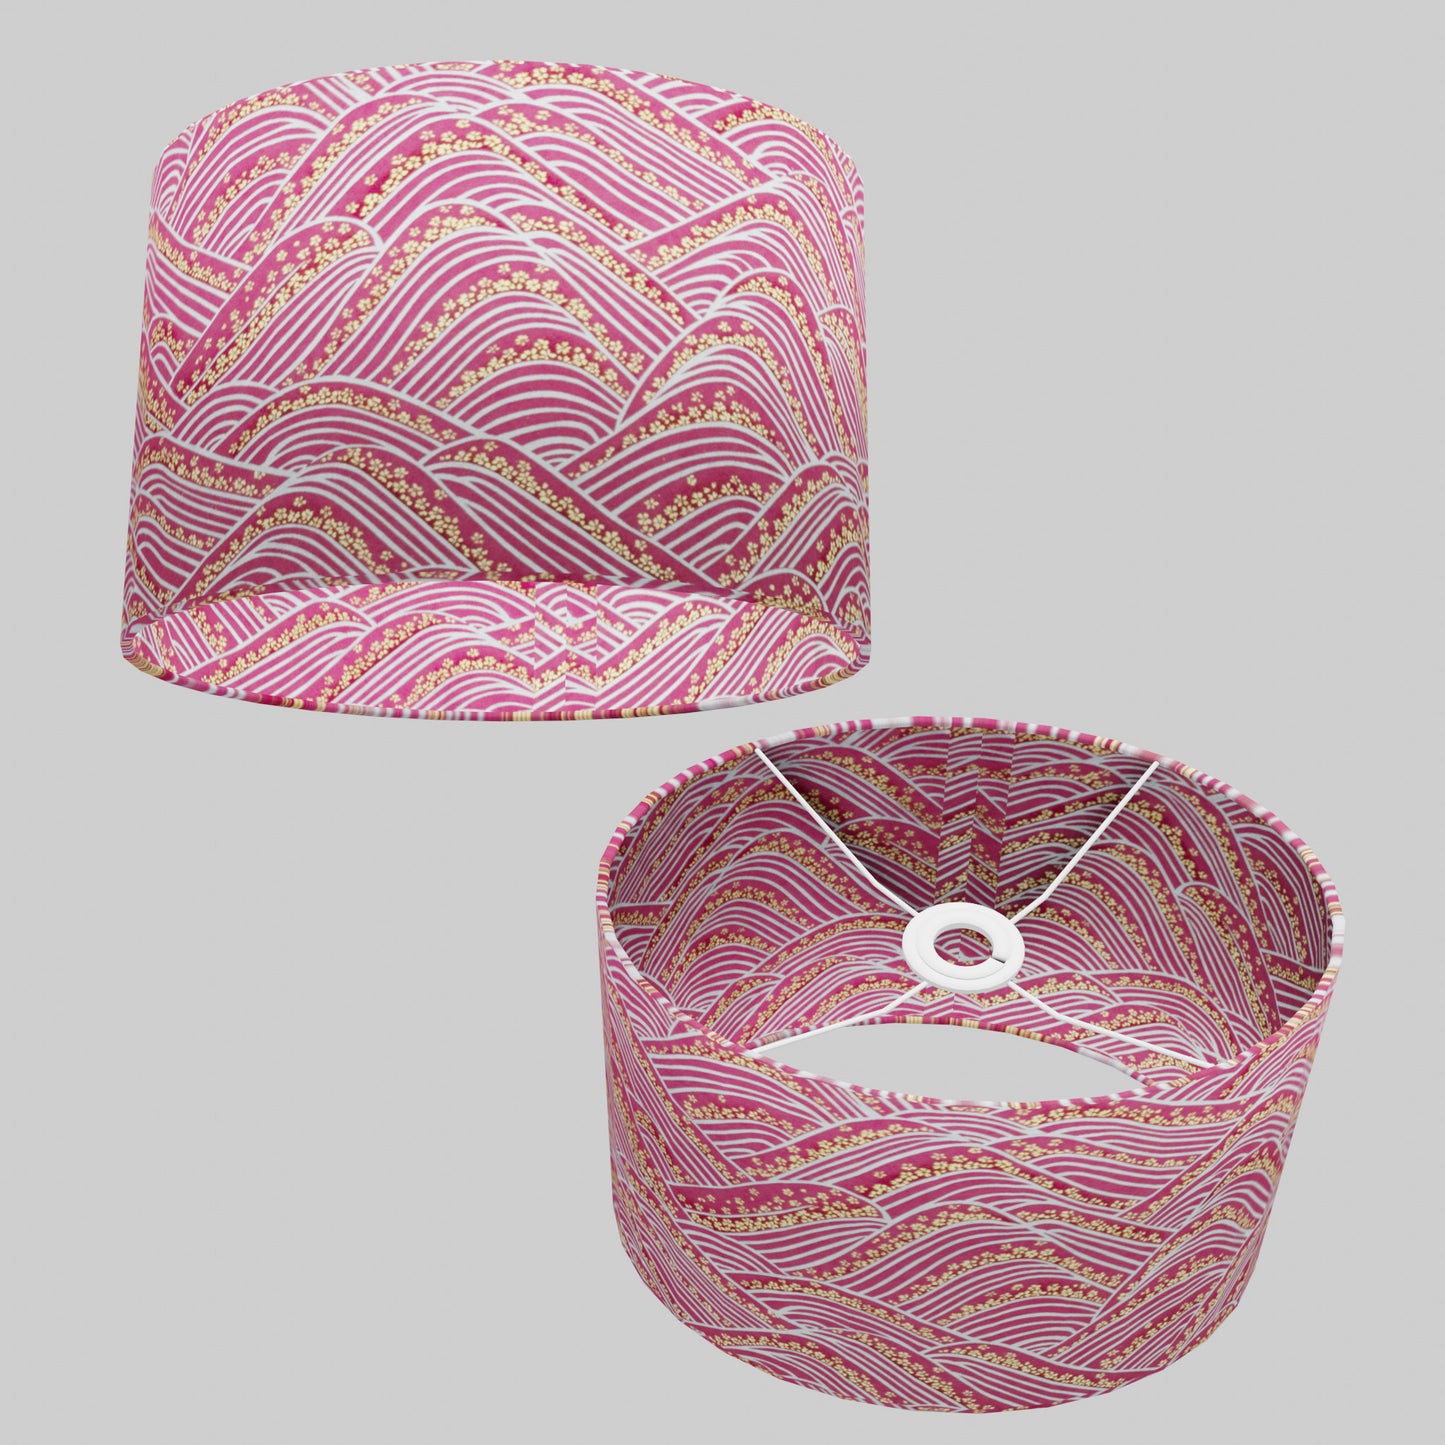 Oval Lamp Shade - W04 - Pink Hills with Gold Flowers, 30cm(w) x 20cm(h) x 22cm(d)